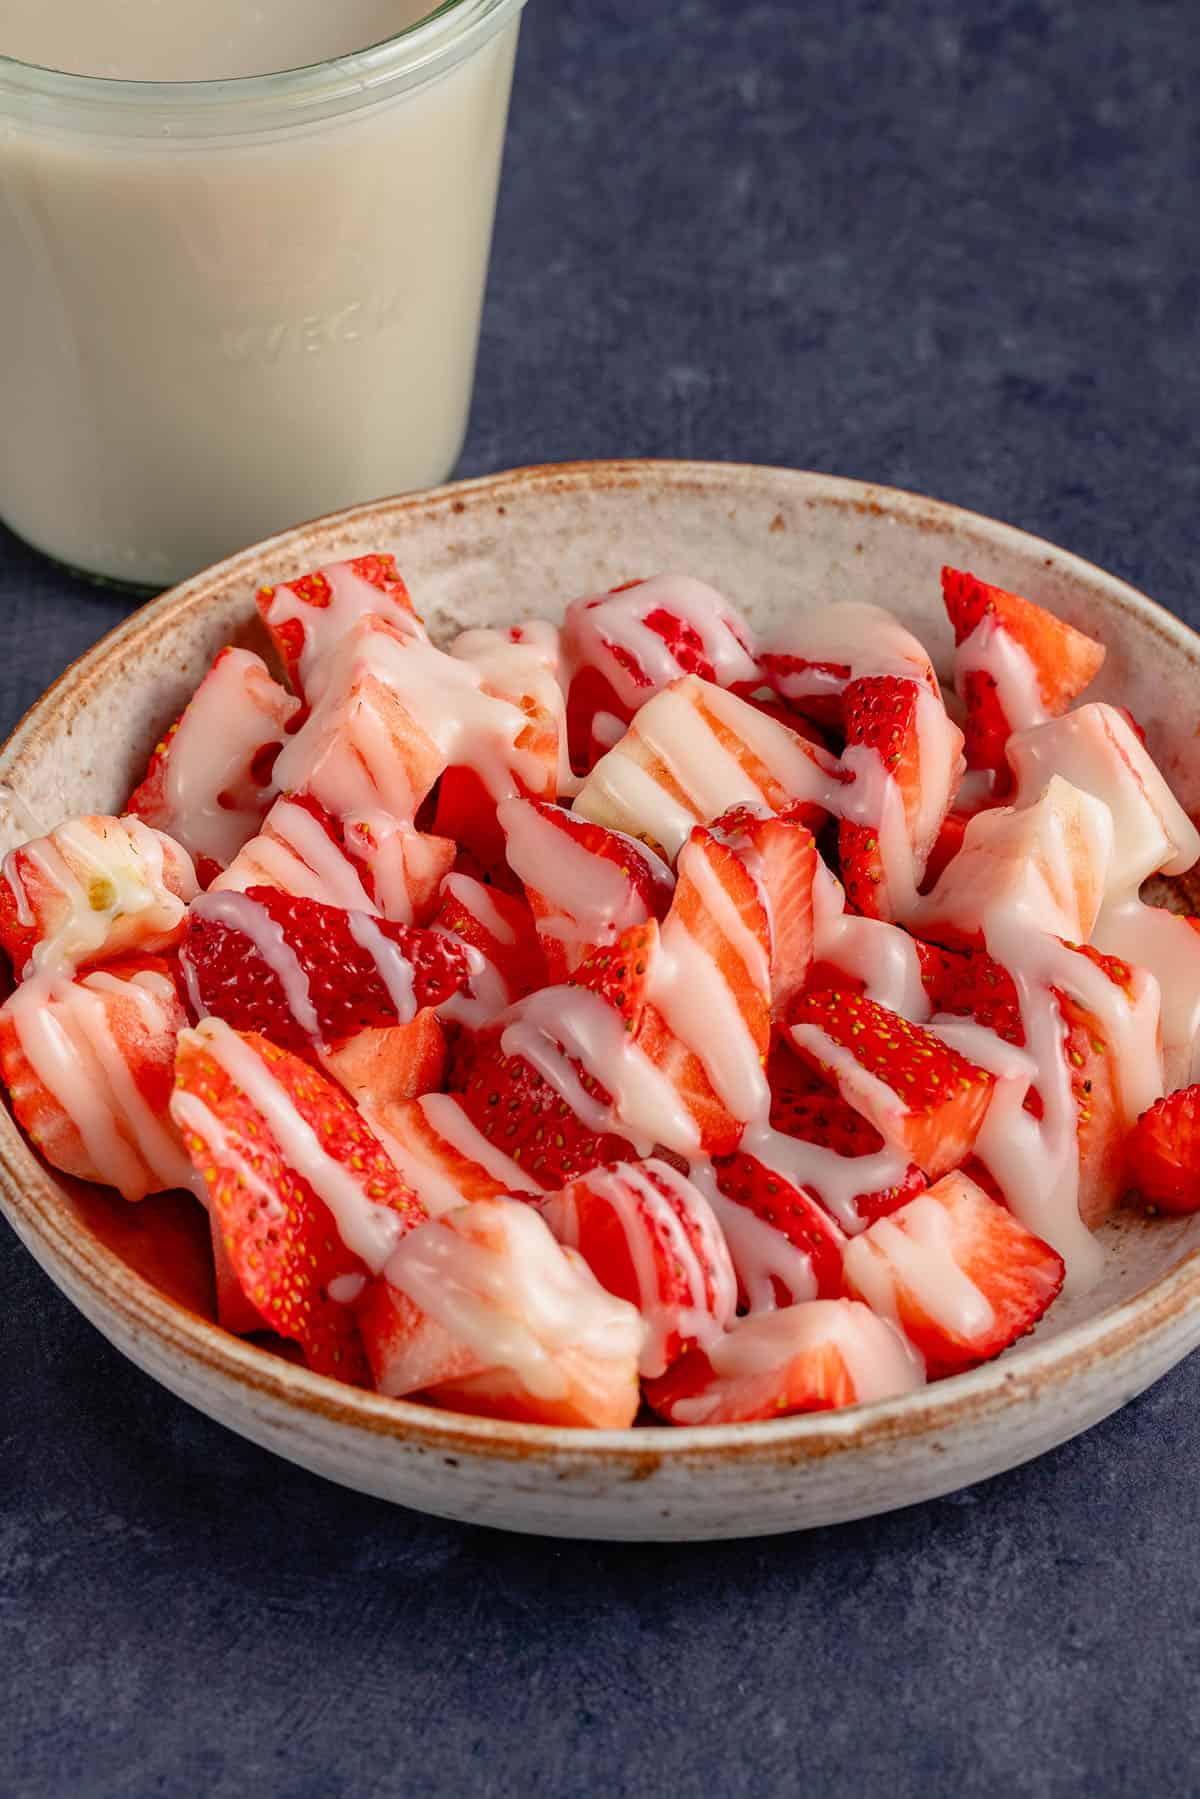 vegan condensed milk drizzled over strawberries in a bowl with a jar of condensed milk behind it.